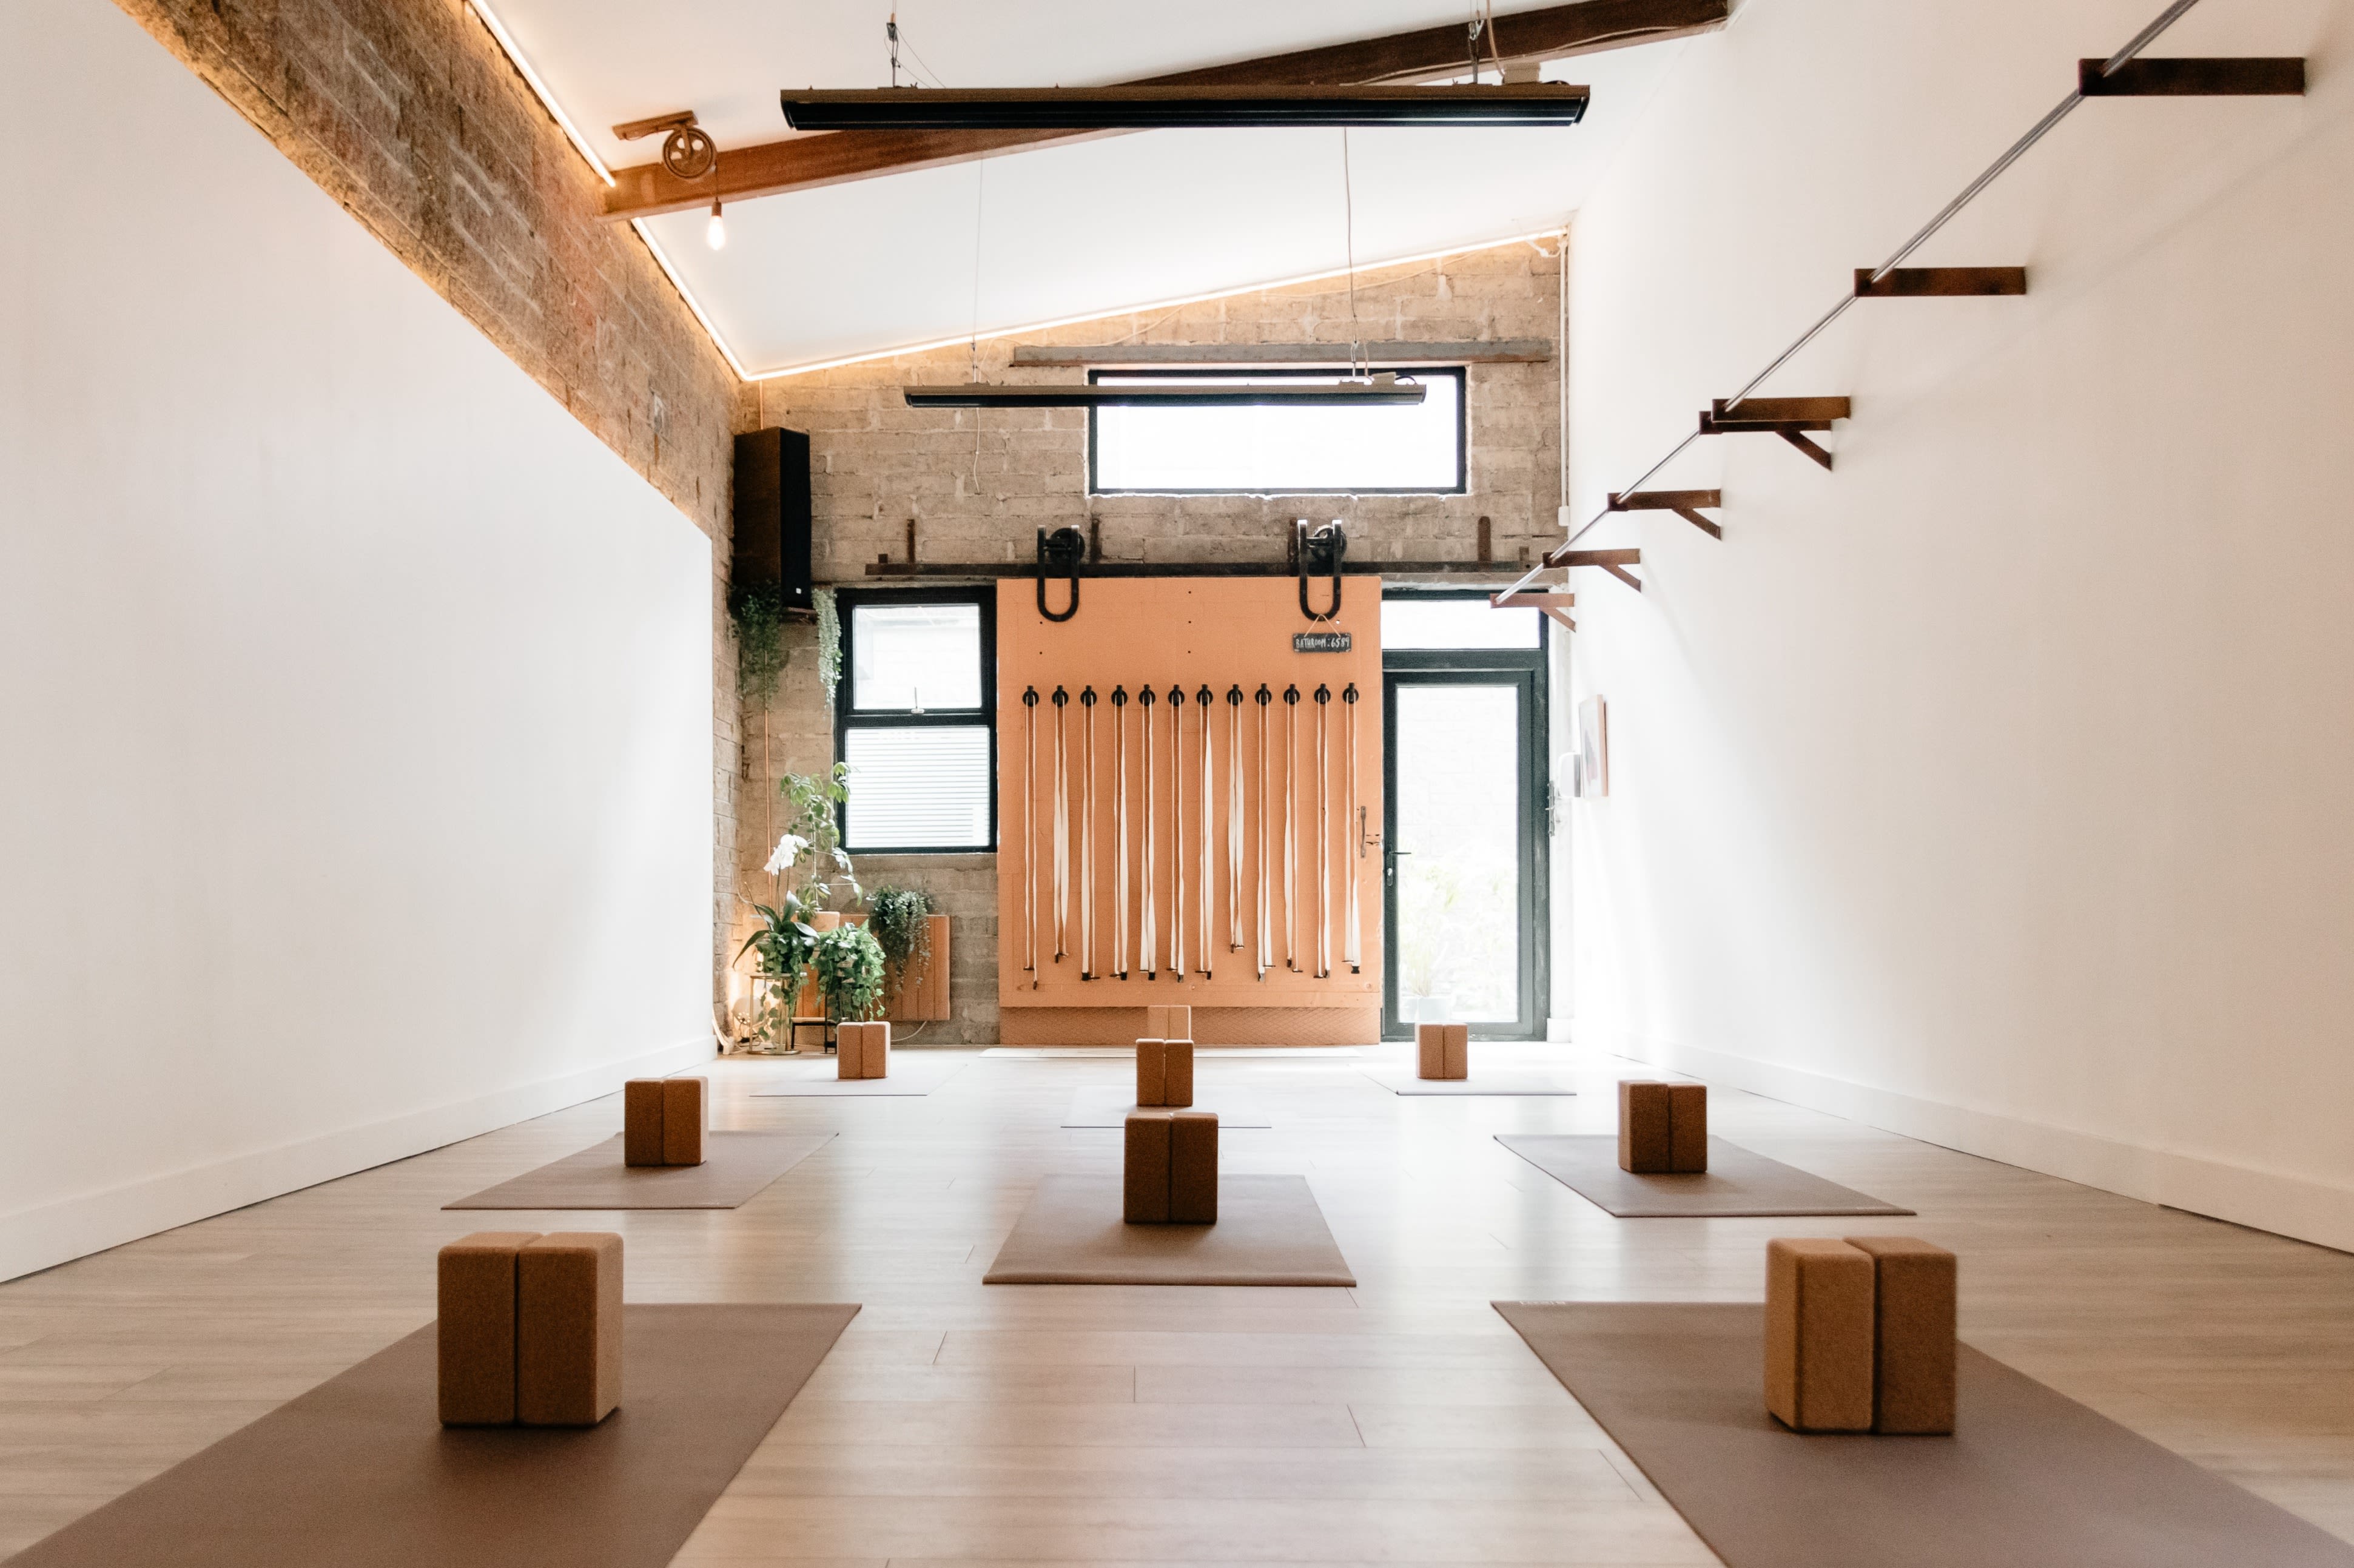 IE Loves Yoga: Read Reviews and Book Classes on ClassPass